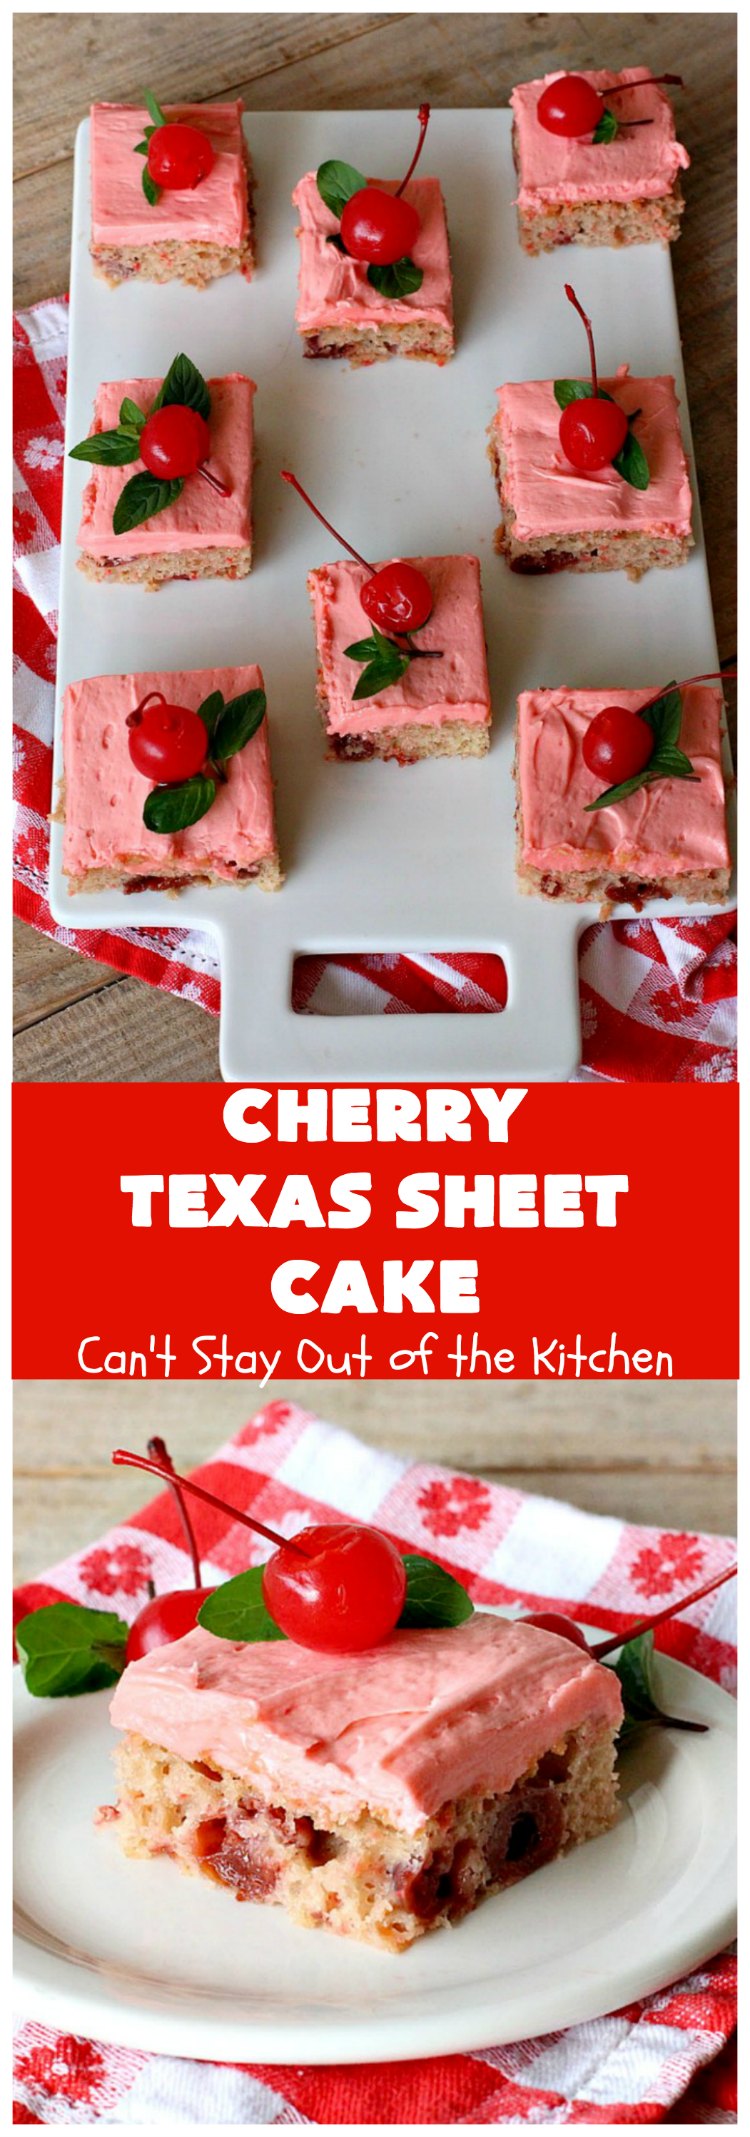 Cherry Texas Sheet Cake | Can't Stay Out of the Kitchen